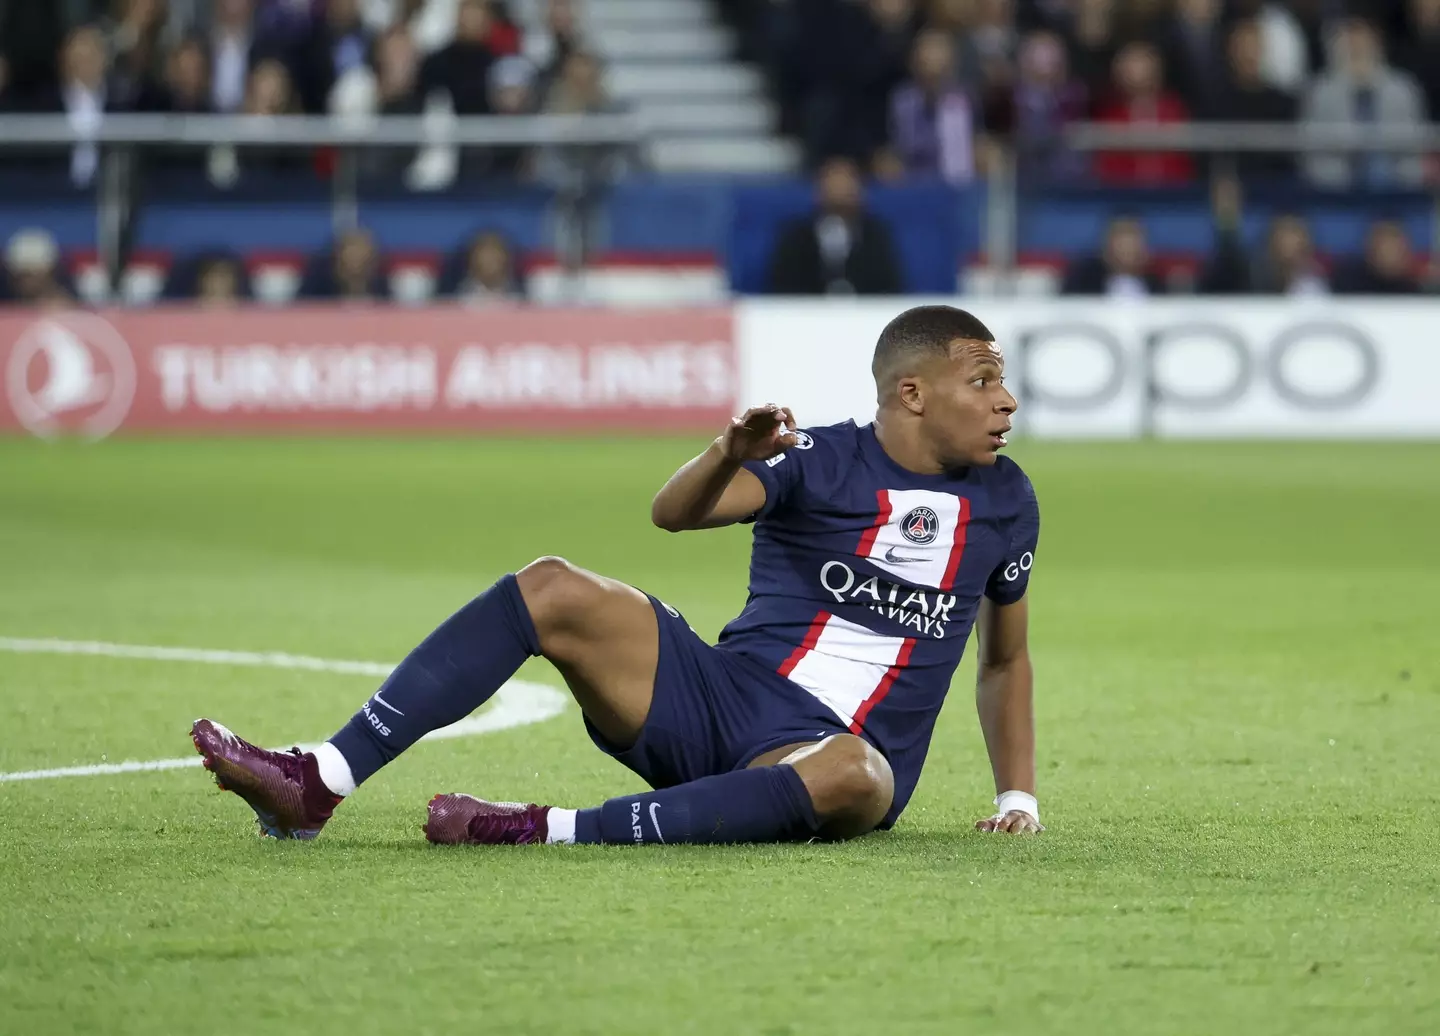 Mbappe has scored 12 goals in 13 appearances in all competitions this term. (Image